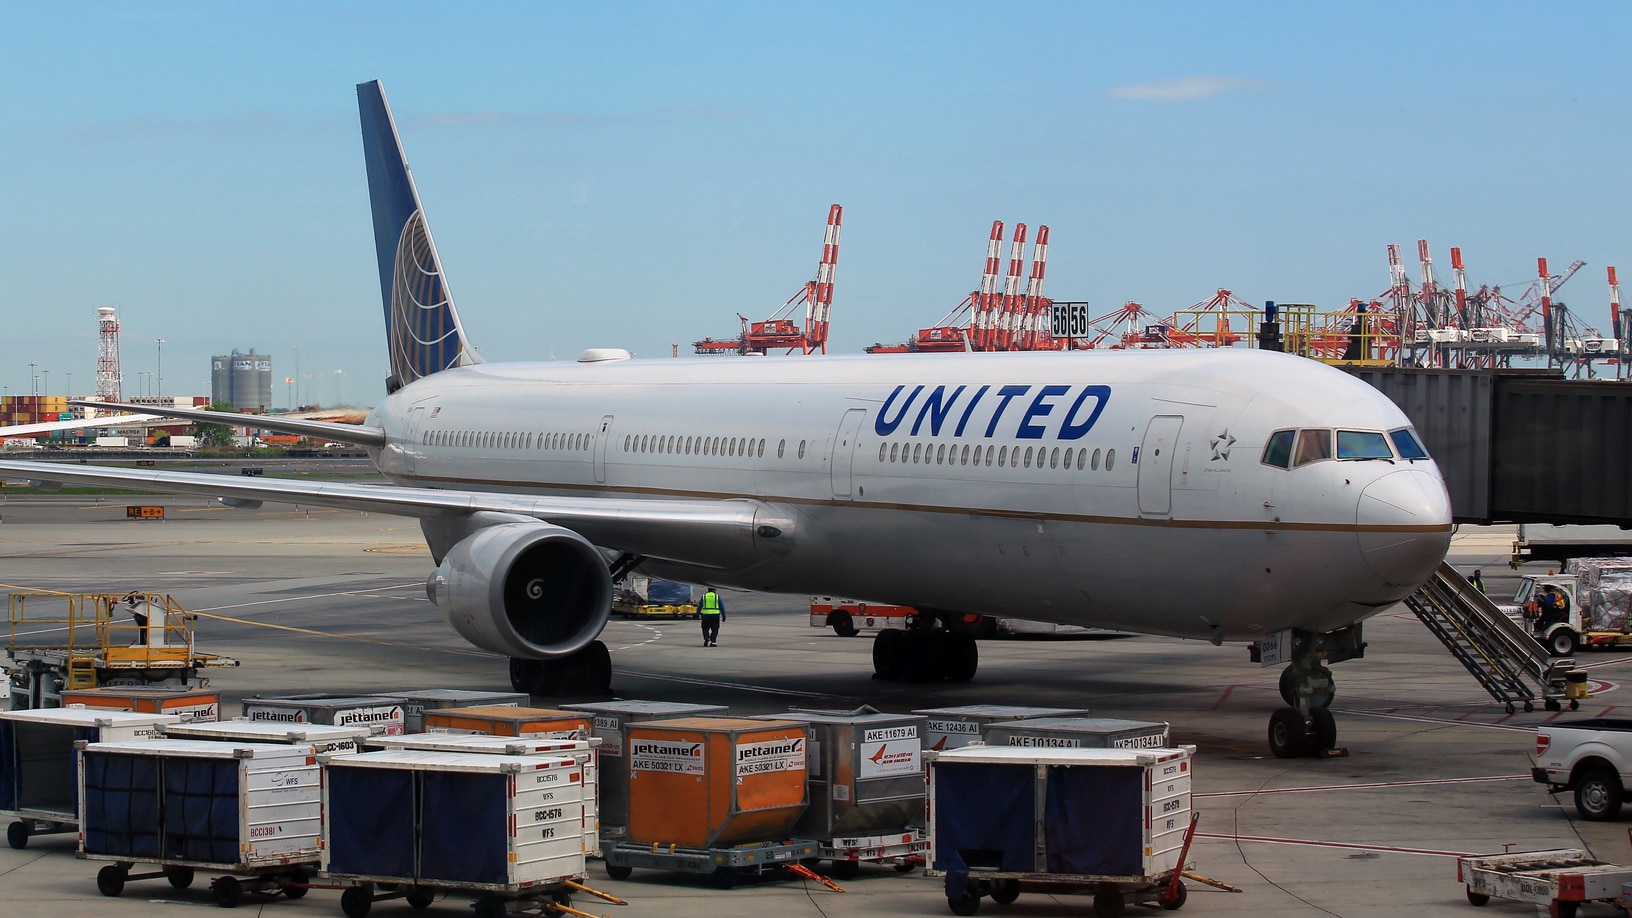 United Airlines passengers remember 'frightening' Boeing 777 engine explosion